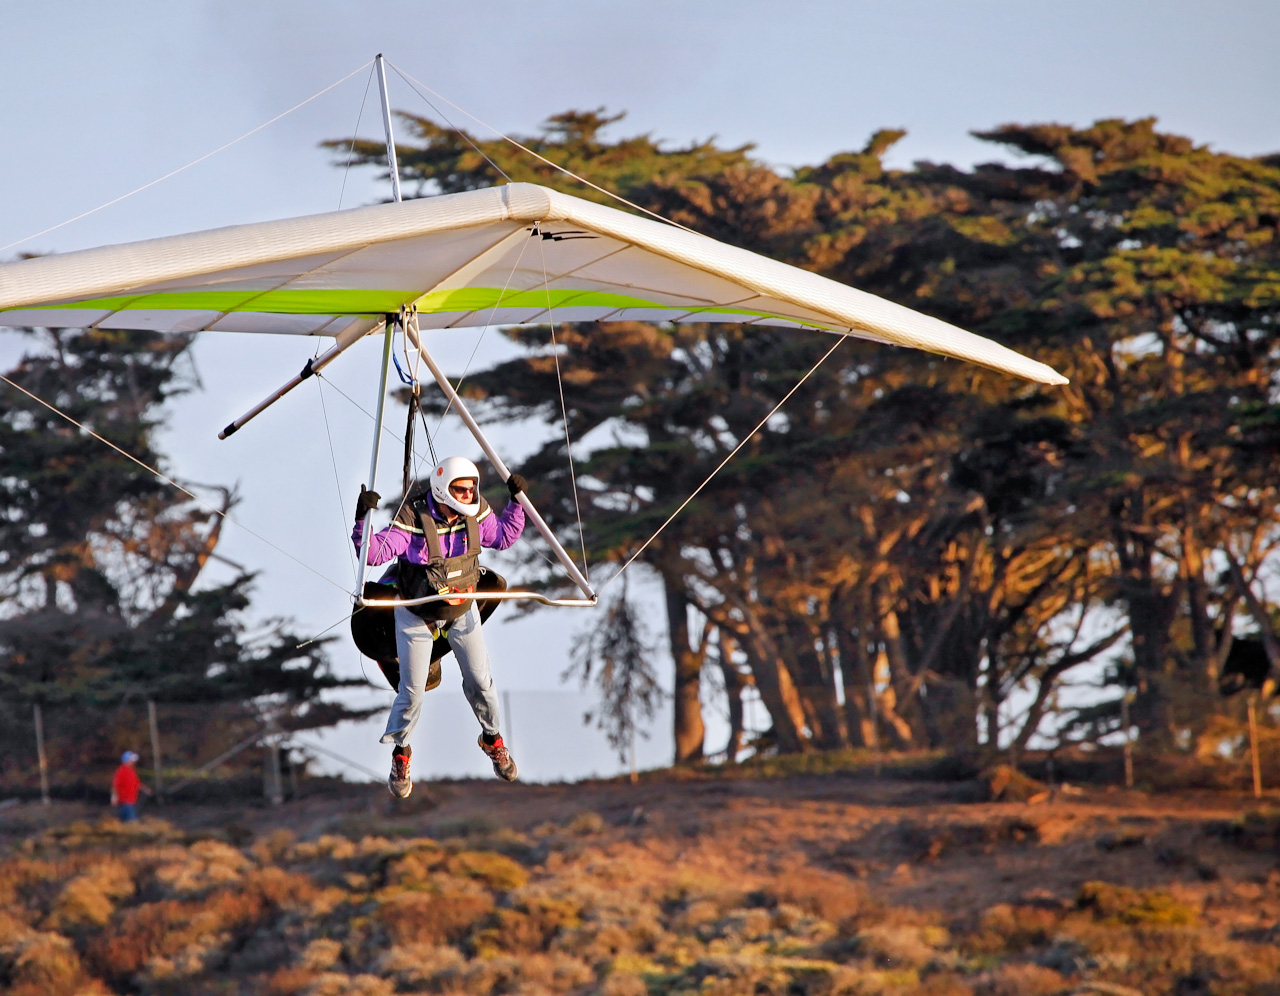 Hang Glider coming in for a Landing, Fort Funston,San Francisco